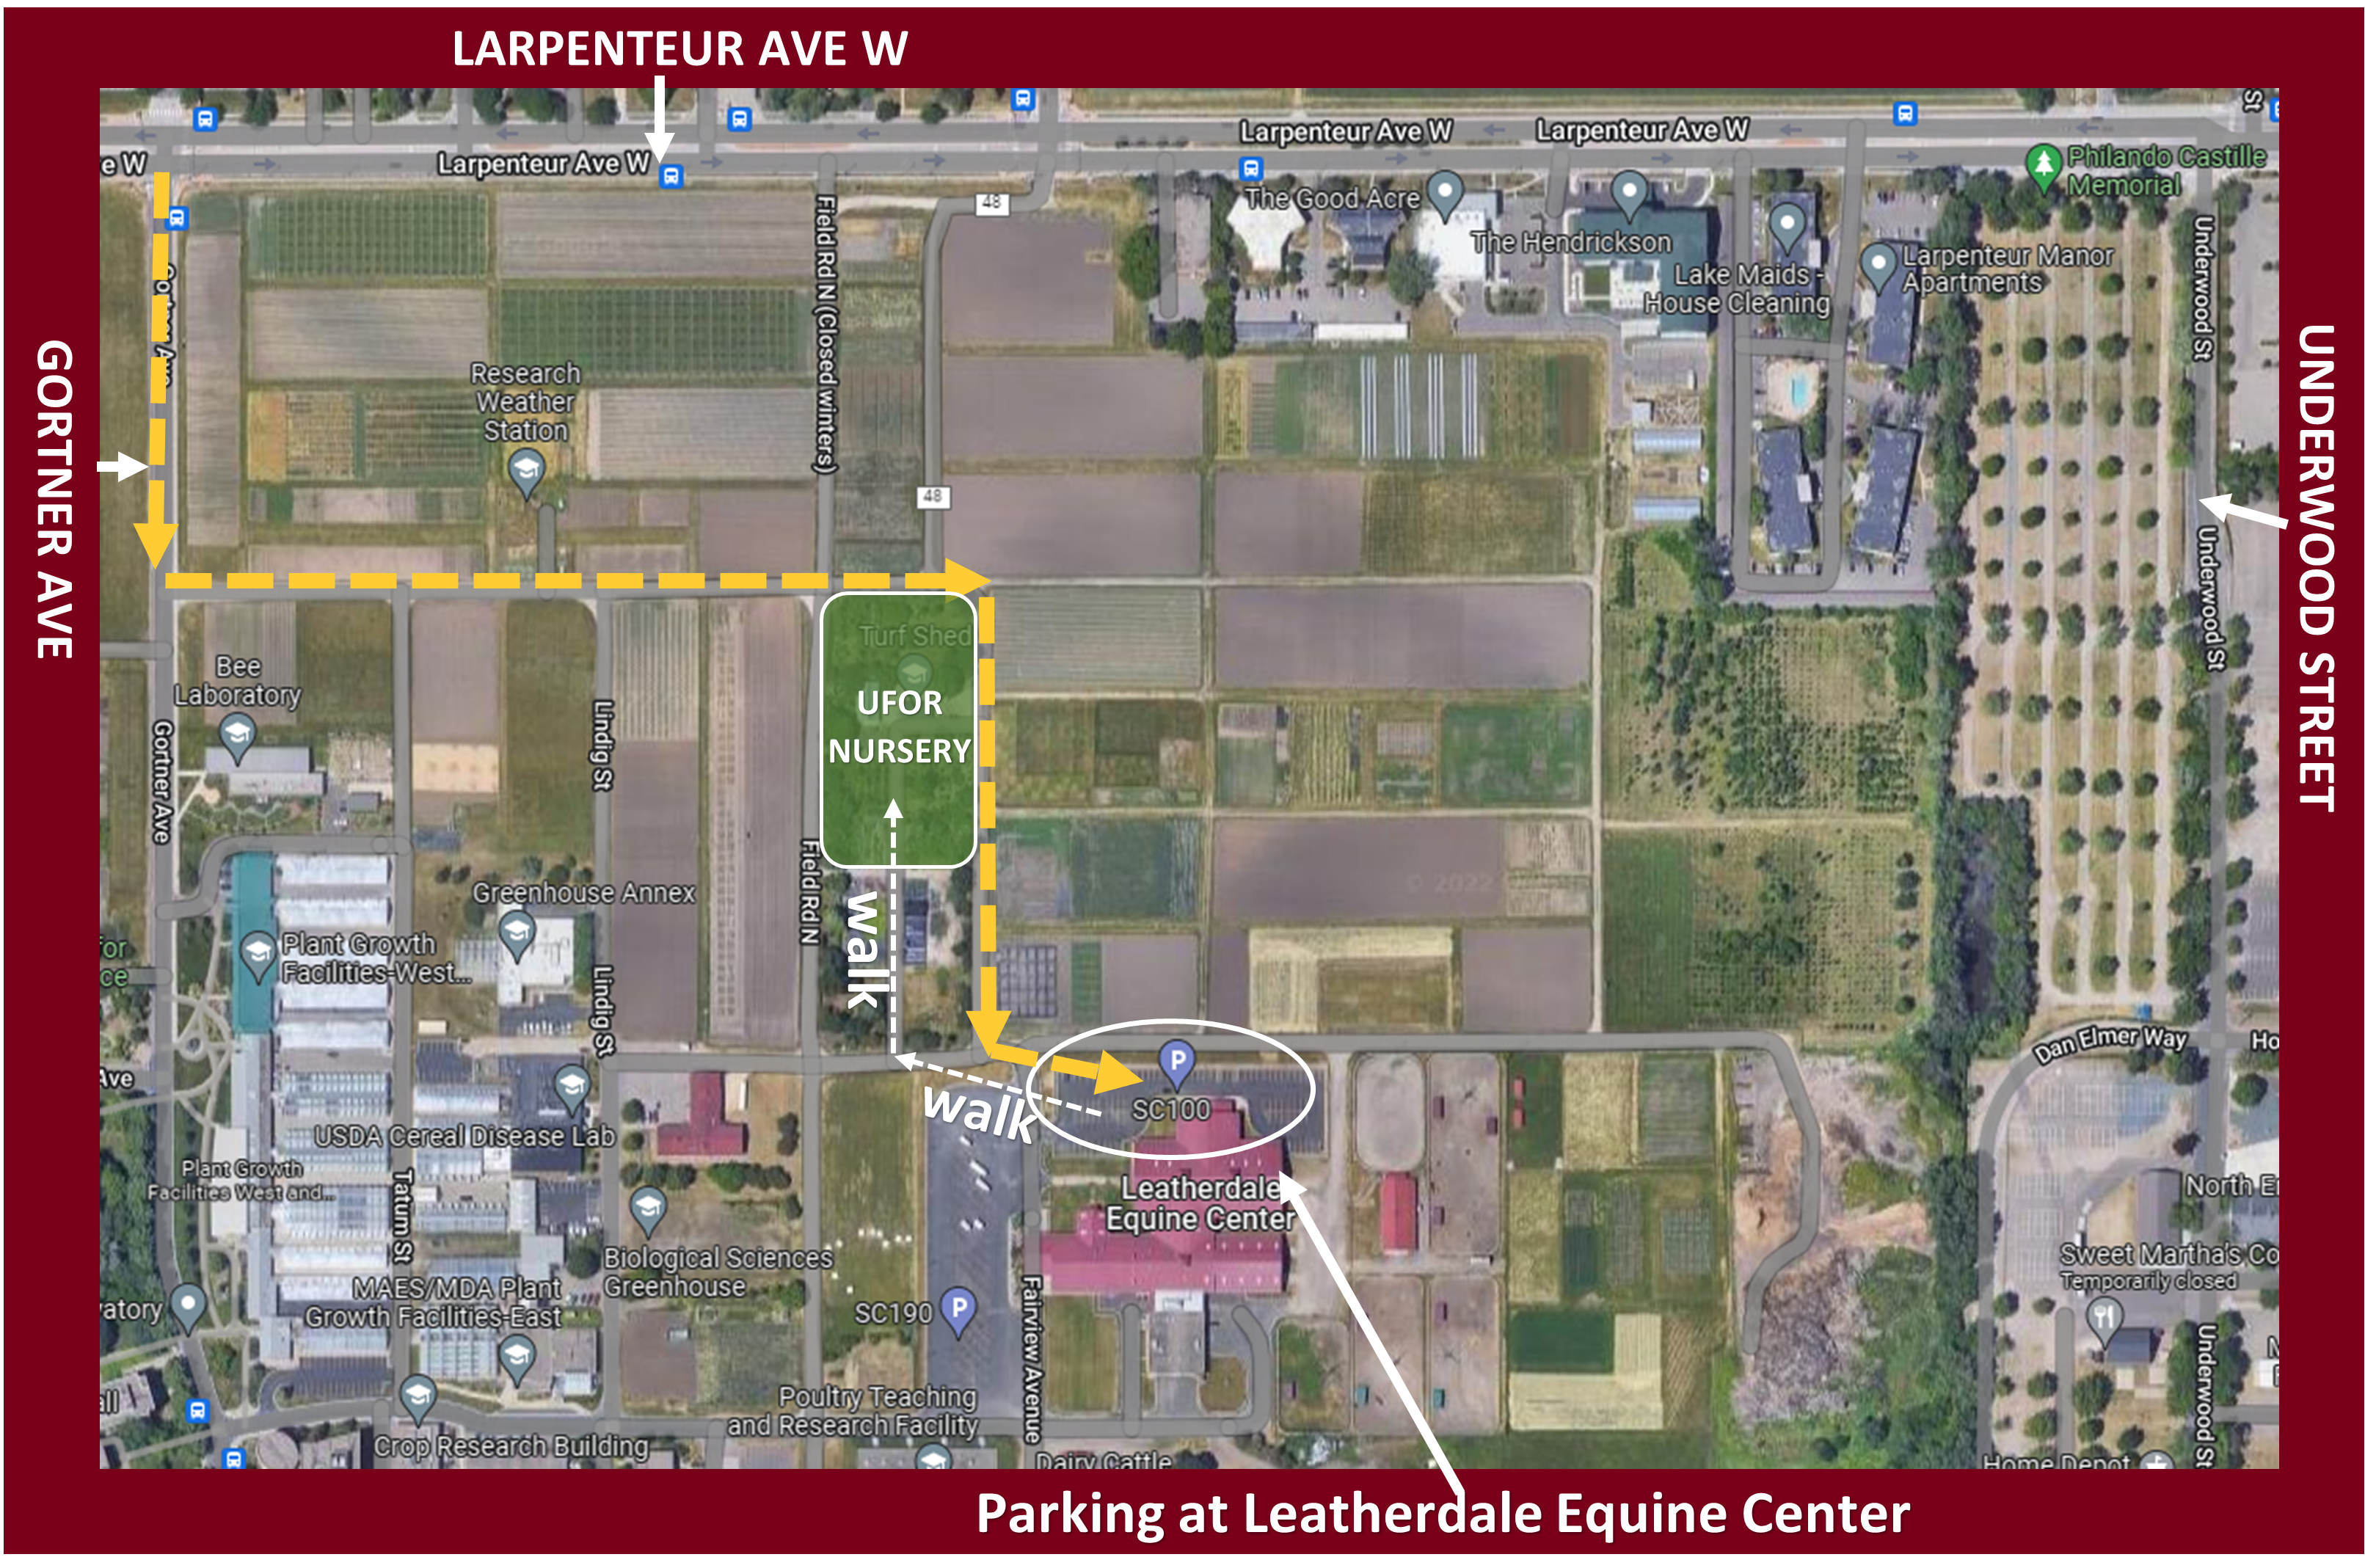 Parking location at Leatherdale Equine Center